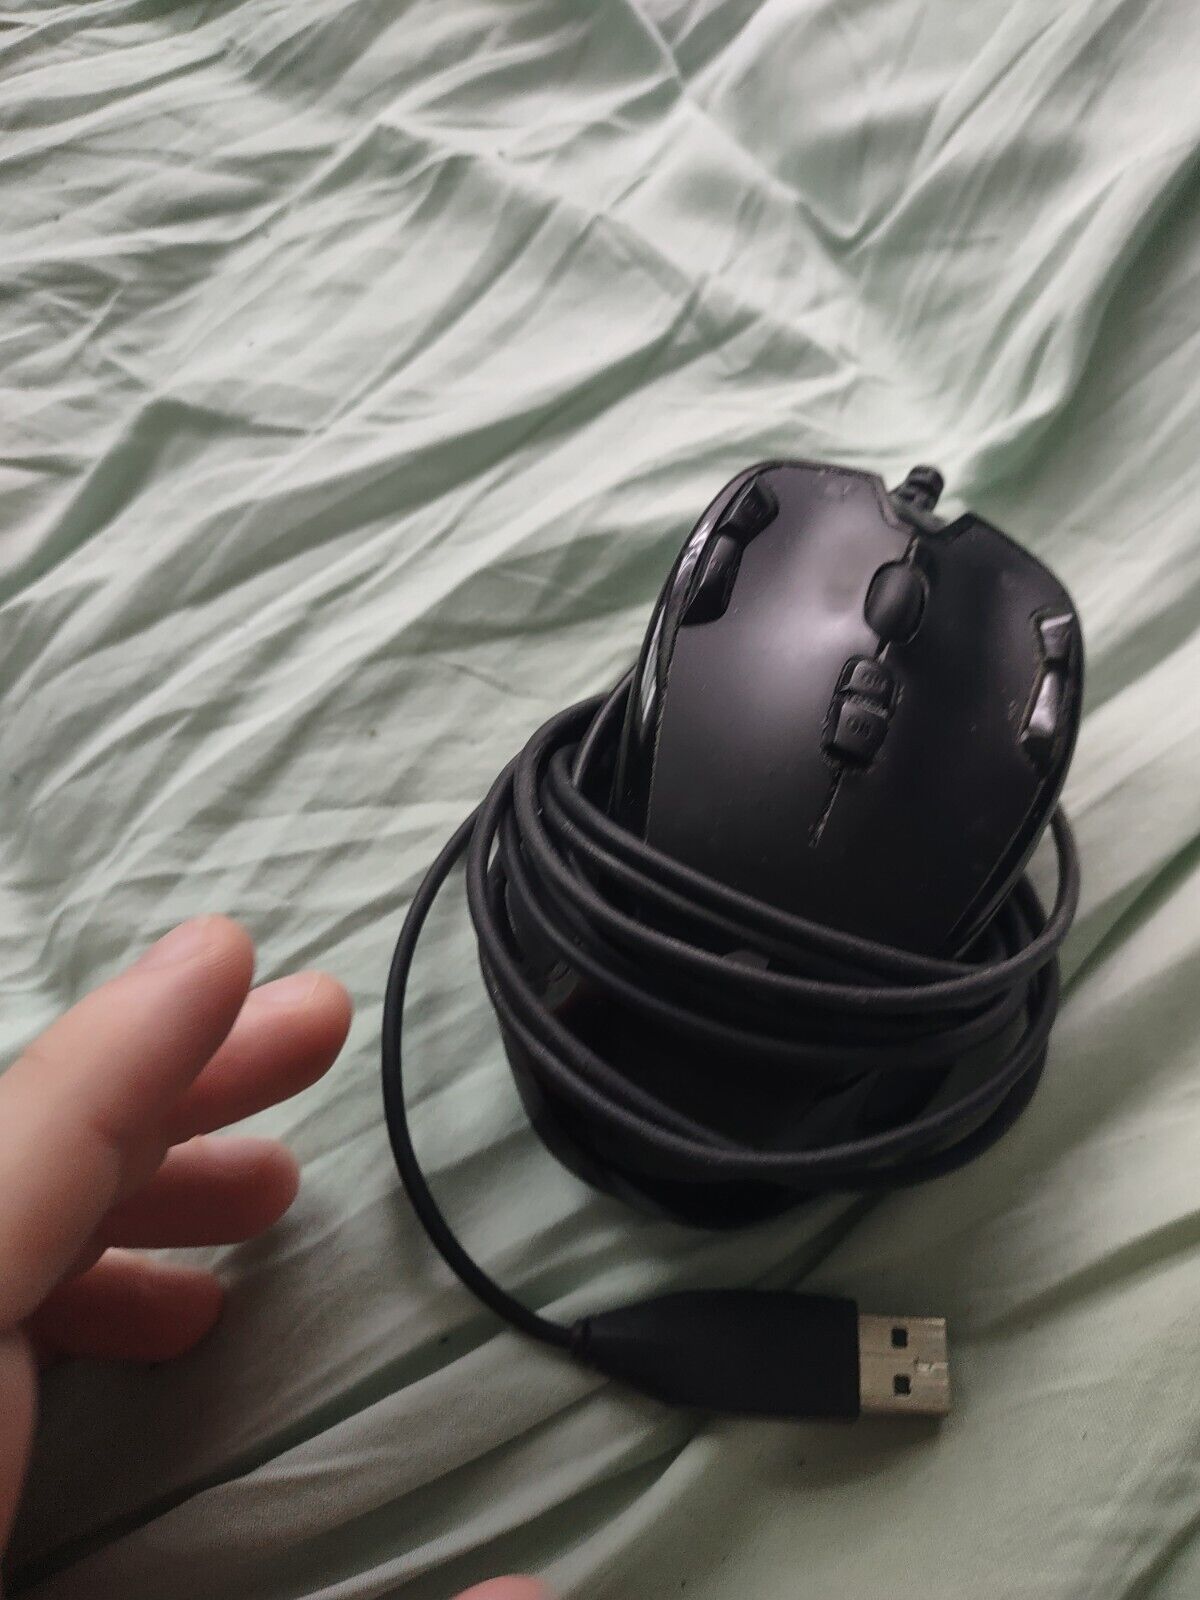 Logitech G300s Optical ambidextrous mouse, somewhat worn